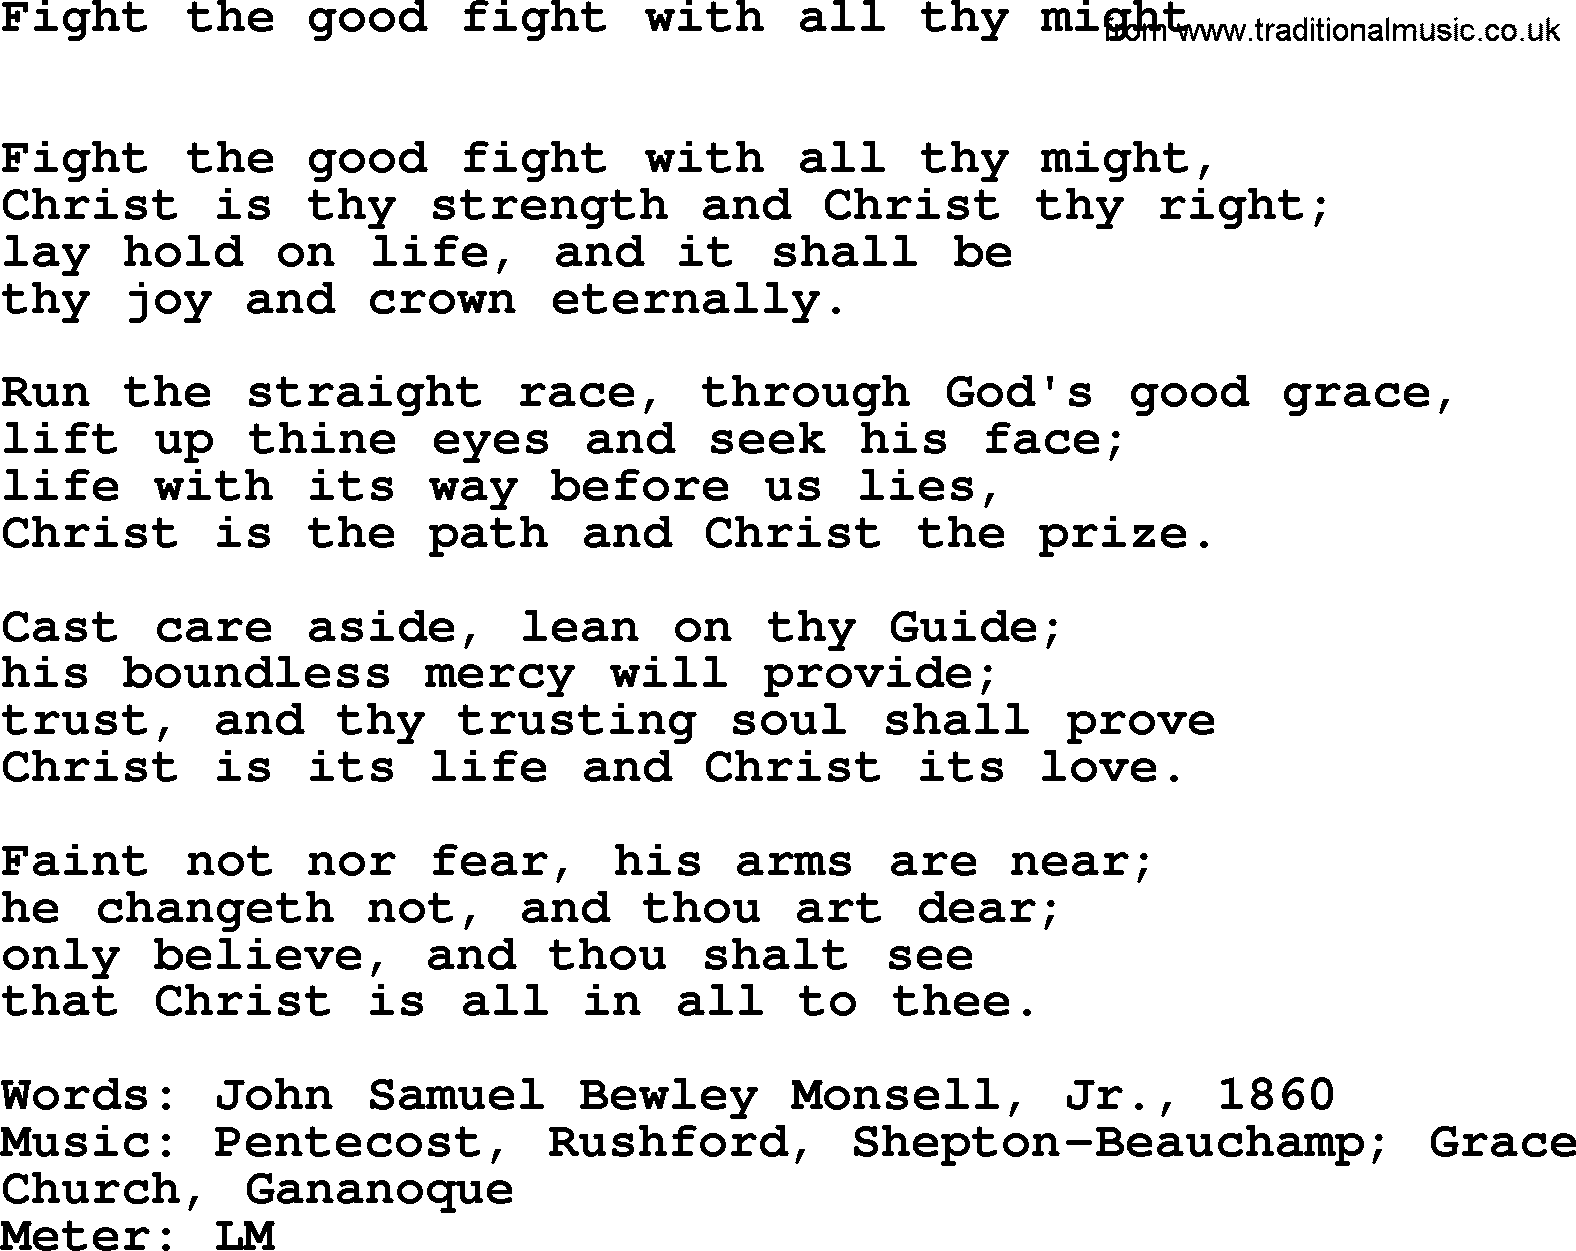 Book of Common Praise Hymn: Fight The Good Fight With All Thy Might.txt lyrics with midi music